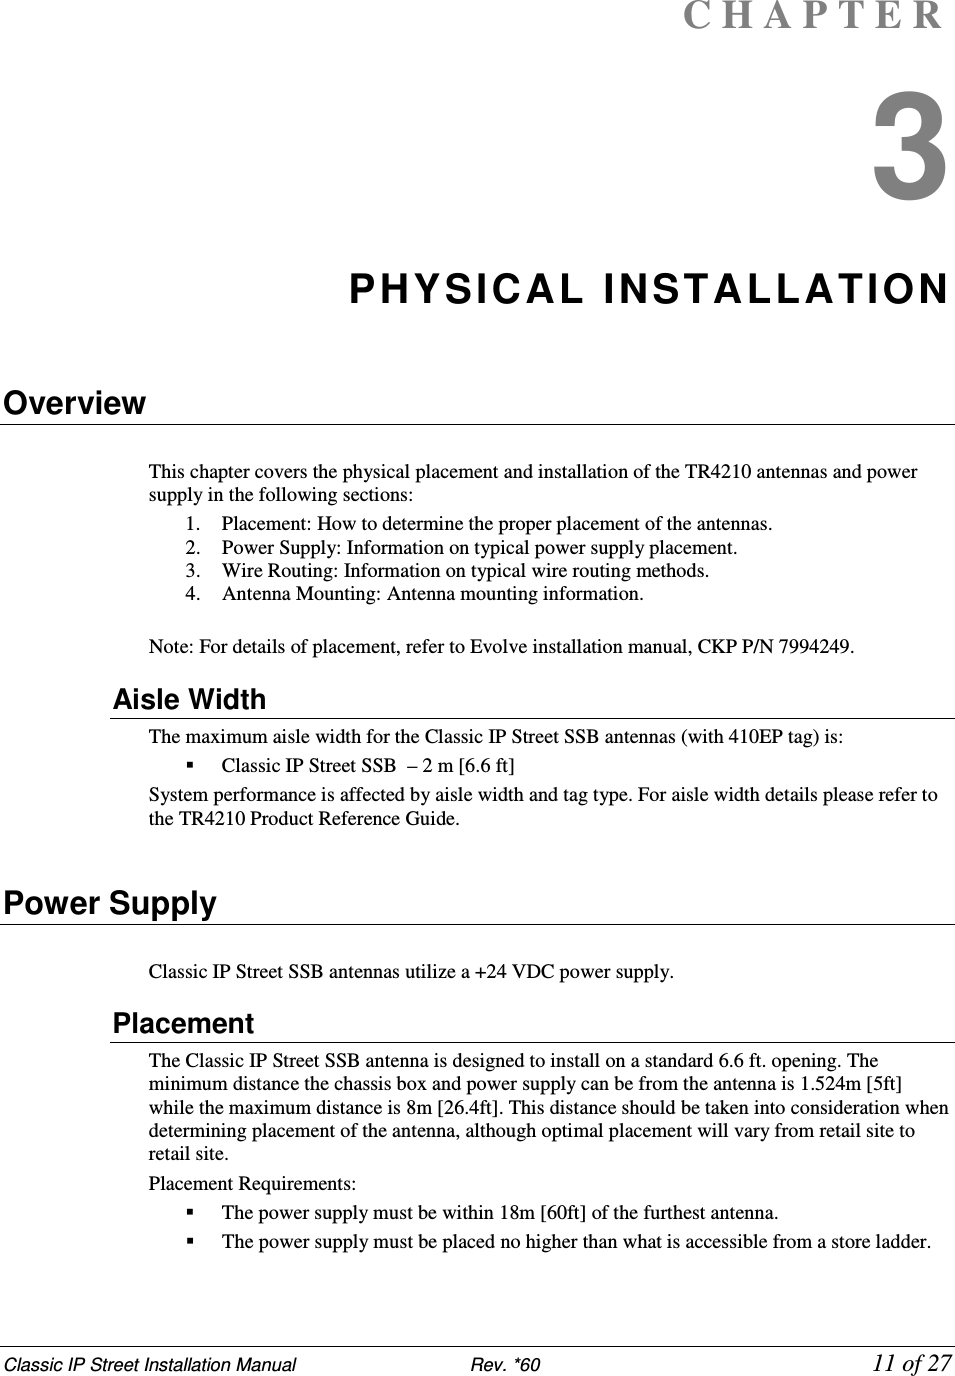 Classic IP Street Installation Manual                           Rev. *60             11 of 27 C H A P T E R  3 PHYSICAL INSTALLATION  Overview  This chapter covers the physical placement and installation of the TR4210 antennas and power supply in the following sections:  1. Placement: How to determine the proper placement of the antennas.  2. Power Supply: Information on typical power supply placement.  3. Wire Routing: Information on typical wire routing methods.  4. Antenna Mounting: Antenna mounting information.  Note: For details of placement, refer to Evolve installation manual, CKP P/N 7994249. Aisle Width The maximum aisle width for the Classic IP Street SSB antennas (with 410EP tag) is:   Classic IP Street SSB  – 2 m [6.6 ft] System performance is affected by aisle width and tag type. For aisle width details please refer to the TR4210 Product Reference Guide.  Power Supply  Classic IP Street SSB antennas utilize a +24 VDC power supply. Placement The Classic IP Street SSB antenna is designed to install on a standard 6.6 ft. opening. The minimum distance the chassis box and power supply can be from the antenna is 1.524m [5ft] while the maximum distance is 8m [26.4ft]. This distance should be taken into consideration when determining placement of the antenna, although optimal placement will vary from retail site to retail site. Placement Requirements:   The power supply must be within 18m [60ft] of the furthest antenna.   The power supply must be placed no higher than what is accessible from a store ladder. 